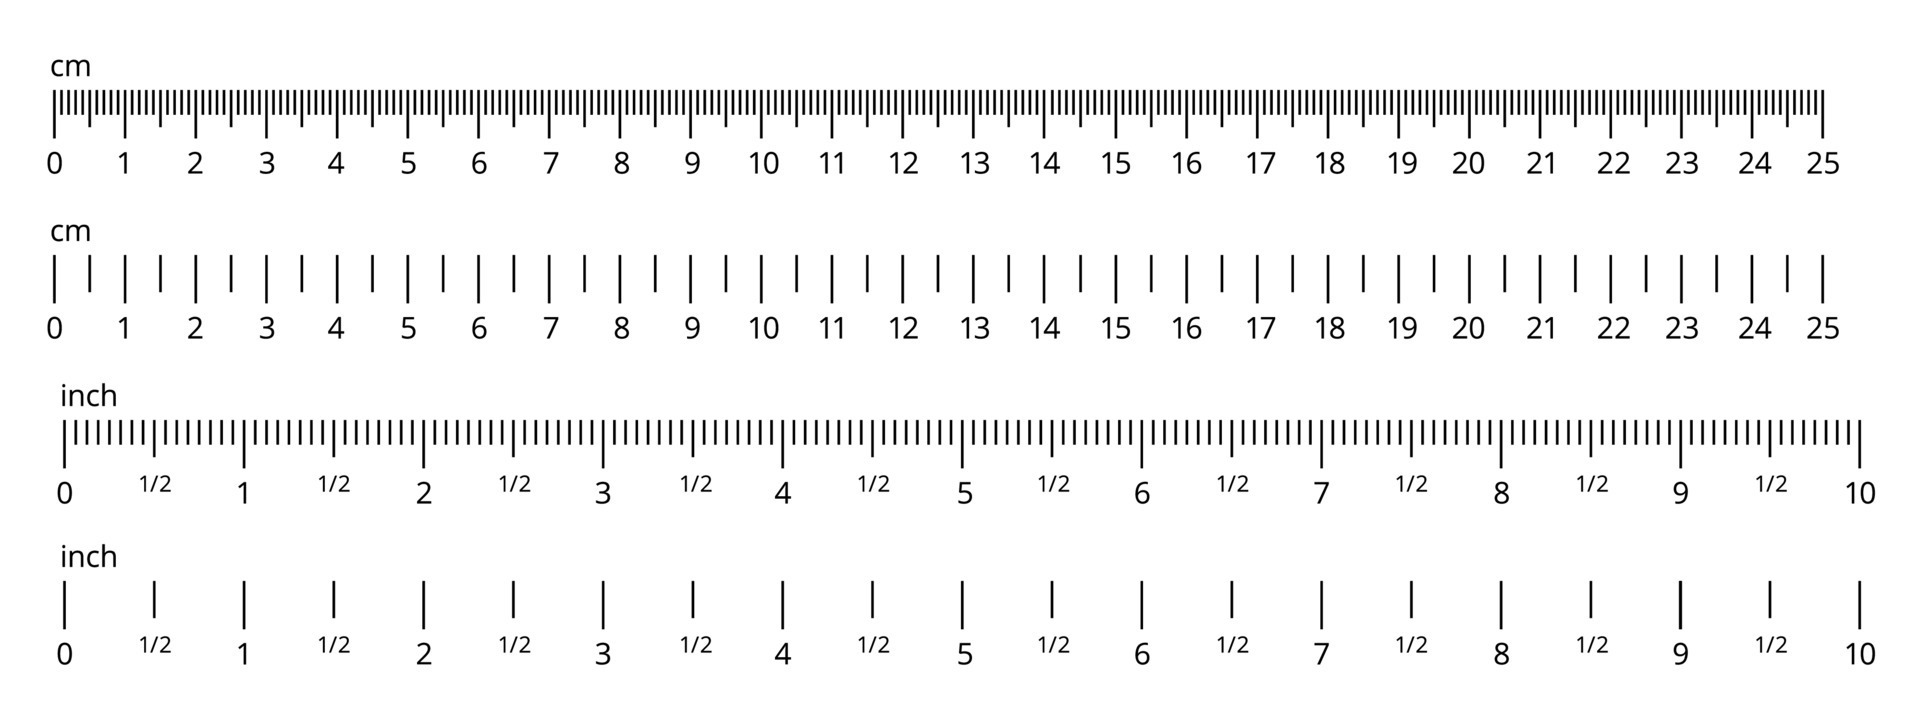 https://static.vecteezy.com/system/resources/previews/024/035/279/original/inch-and-metric-rulers-centimeters-and-inches-measuring-scale-precision-measurement-of-ruler-tools-isolated-set-vector.jpg